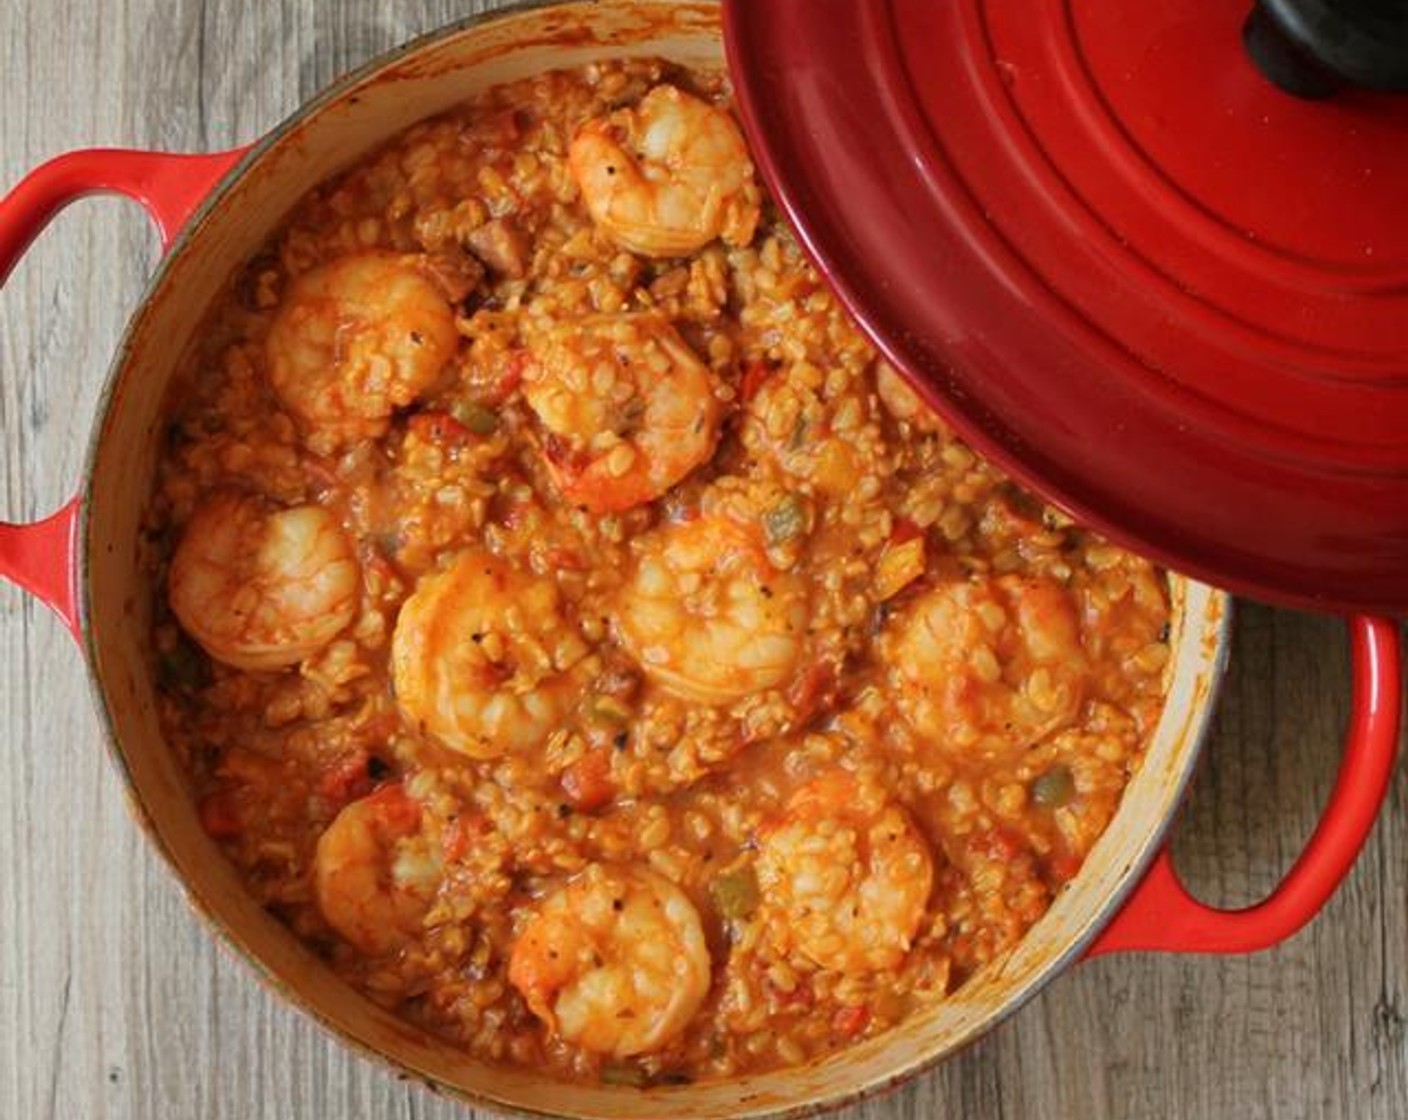 Brown Rice Jambalaya with Shrimp, Chicken Sausage and Bell Peppers